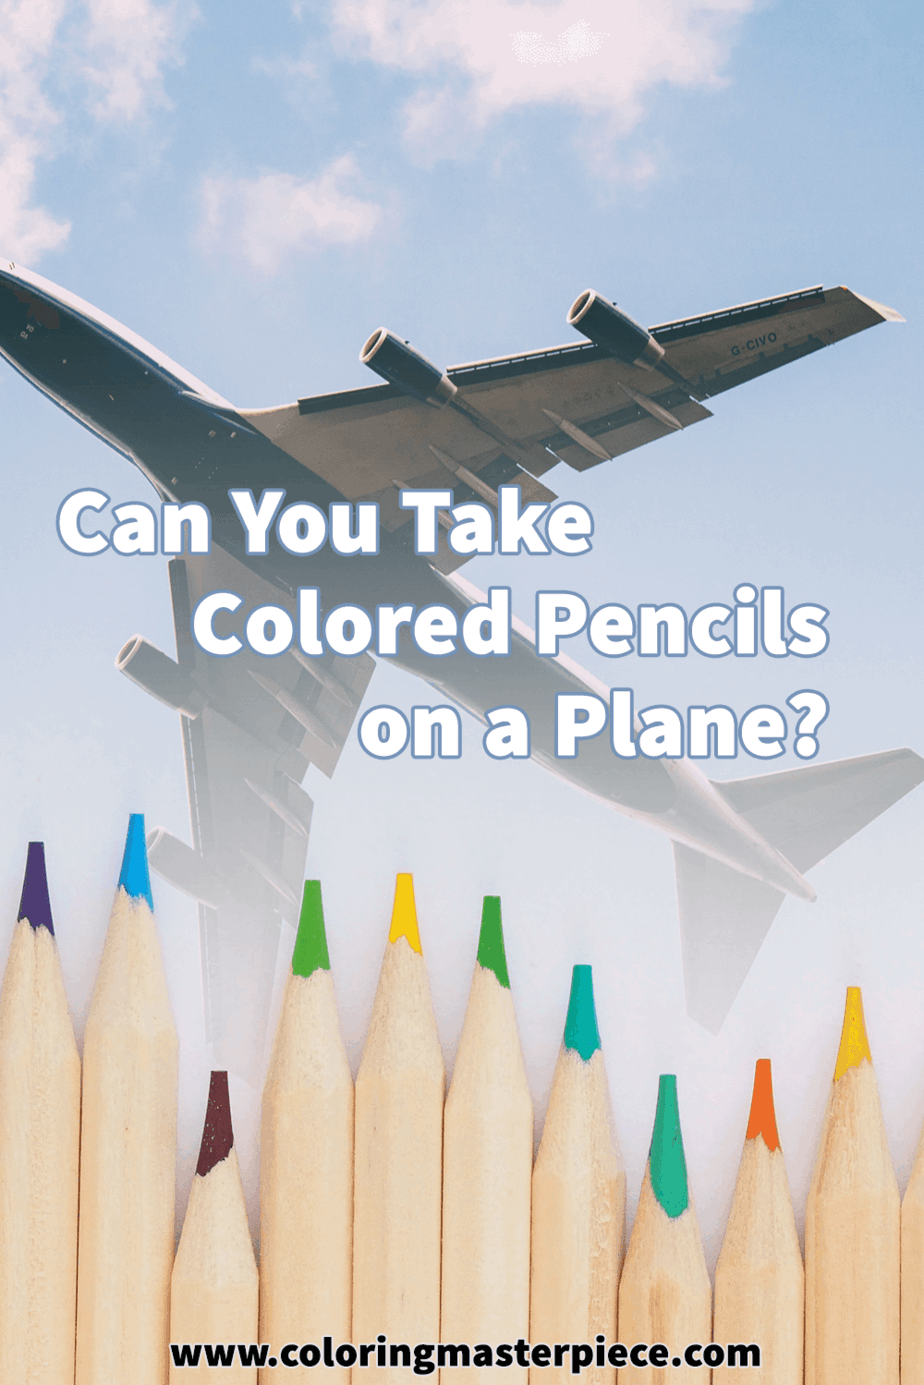 Can You Take Colored Pencils on a Plane? - Adult Coloring Masterpiece